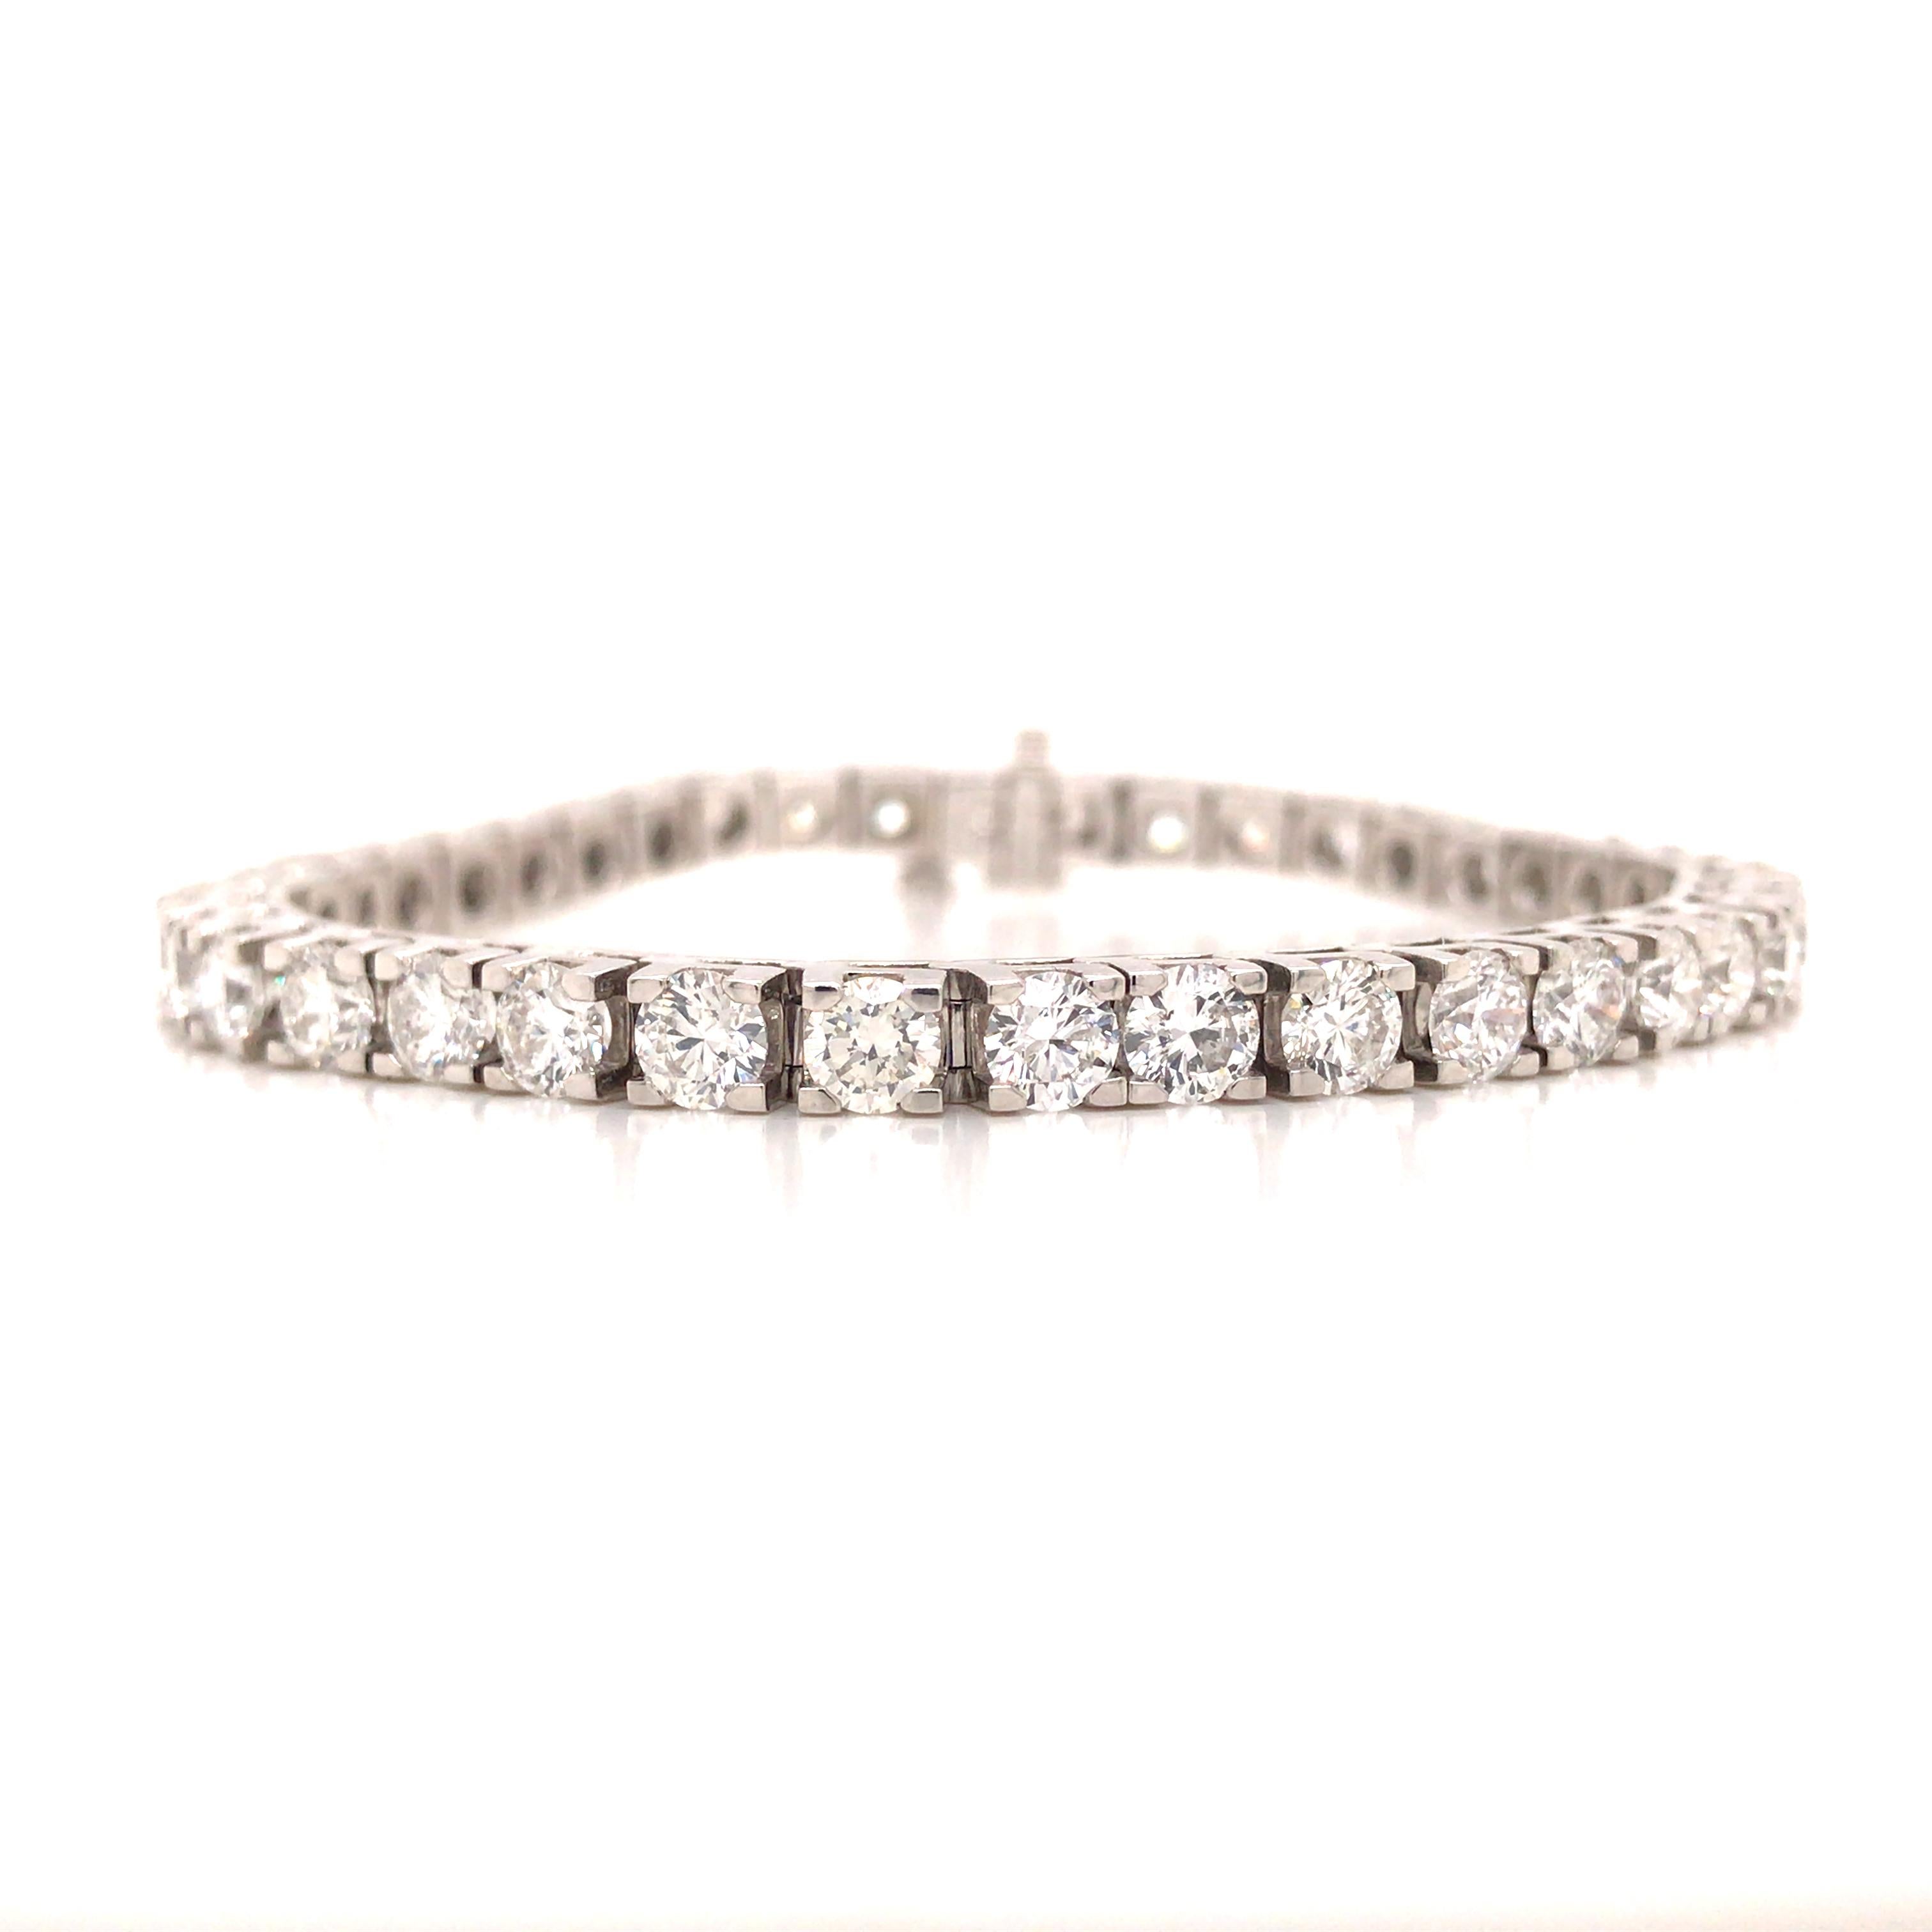 10.53 Carat Diamond Line Bracelet in 14K White Gold. Round Brilliant Cut Diamonds weighing 10.53 carat total weight, G-H in color and VS-SI in clarity are expertly set.  The Bracelet measures 7 inch in length and 3/16 inch in width.  19.9 grams.